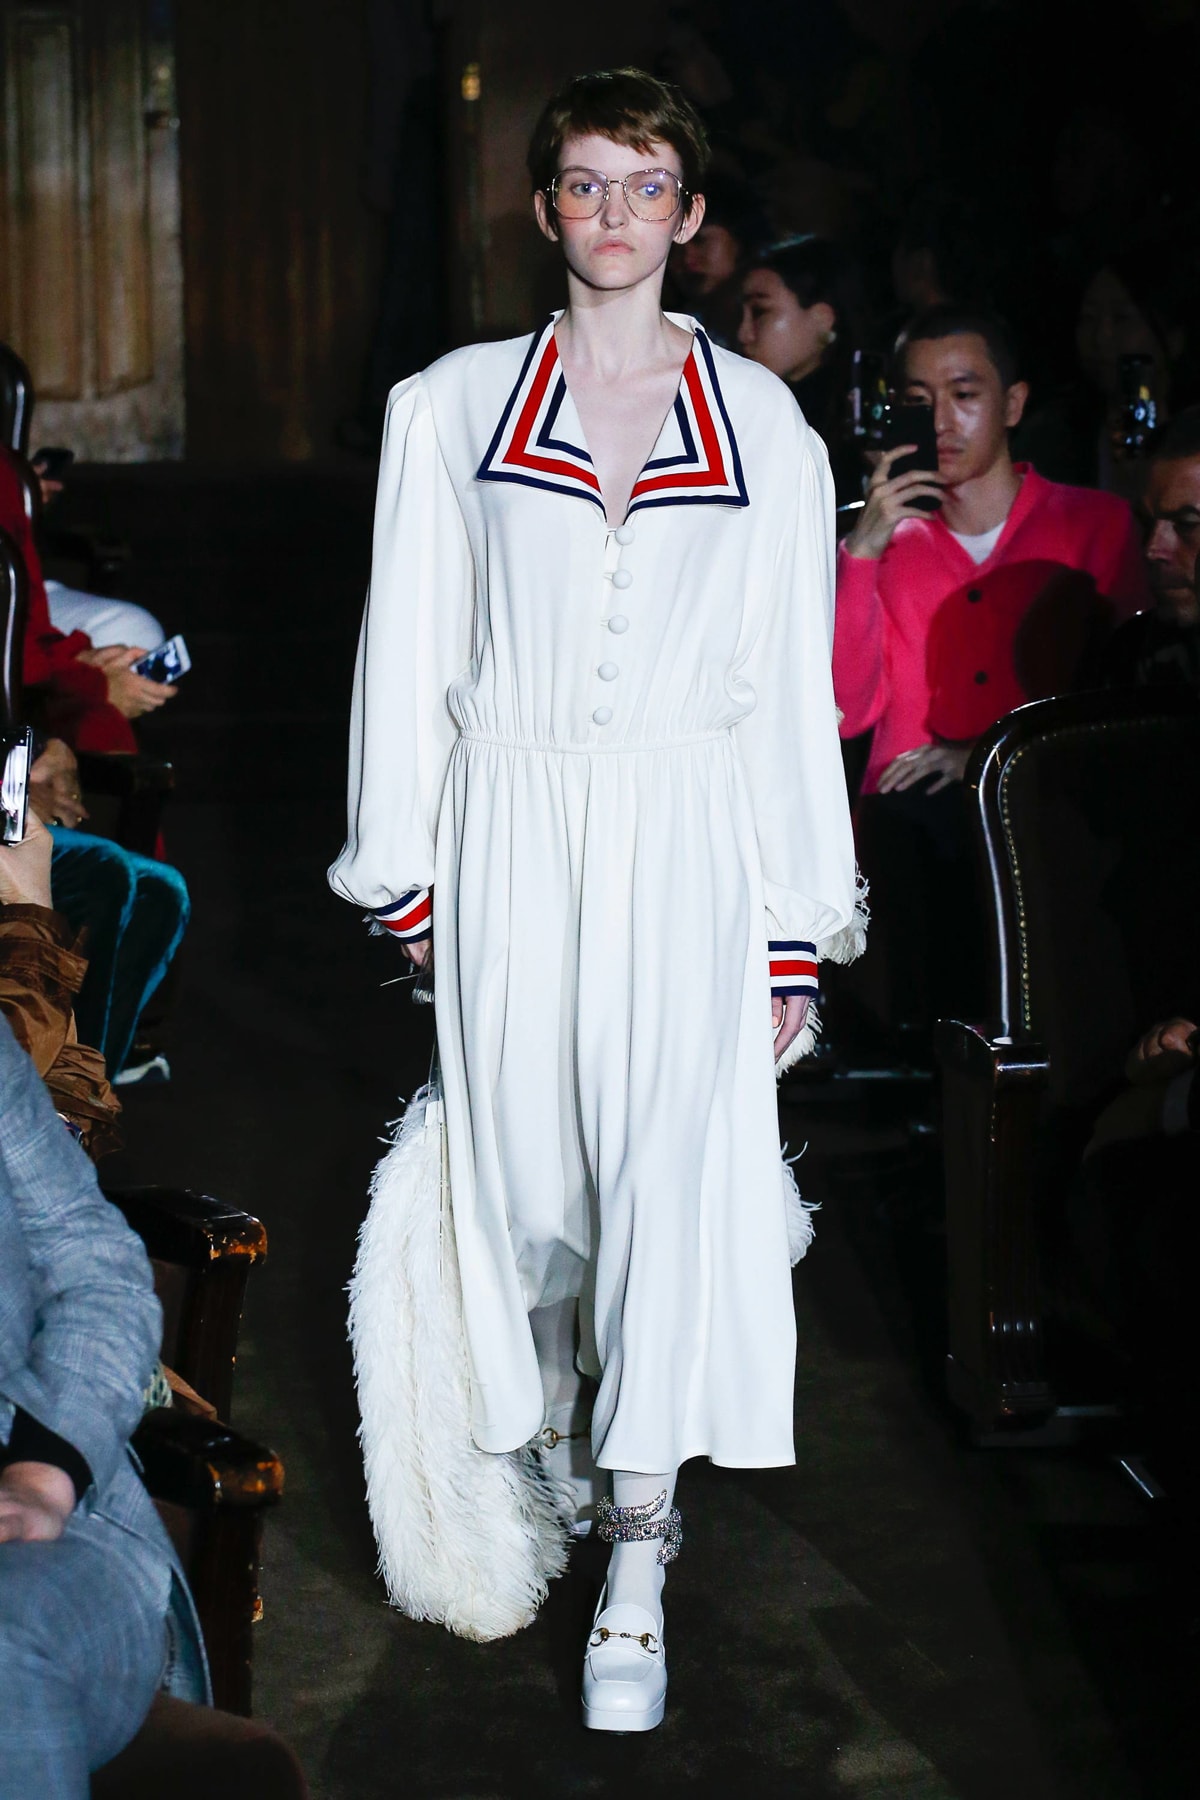 Gucci Alessandro Michelle Spring Summer 2019 Paris Fashion Week Show Collection Dress Red White